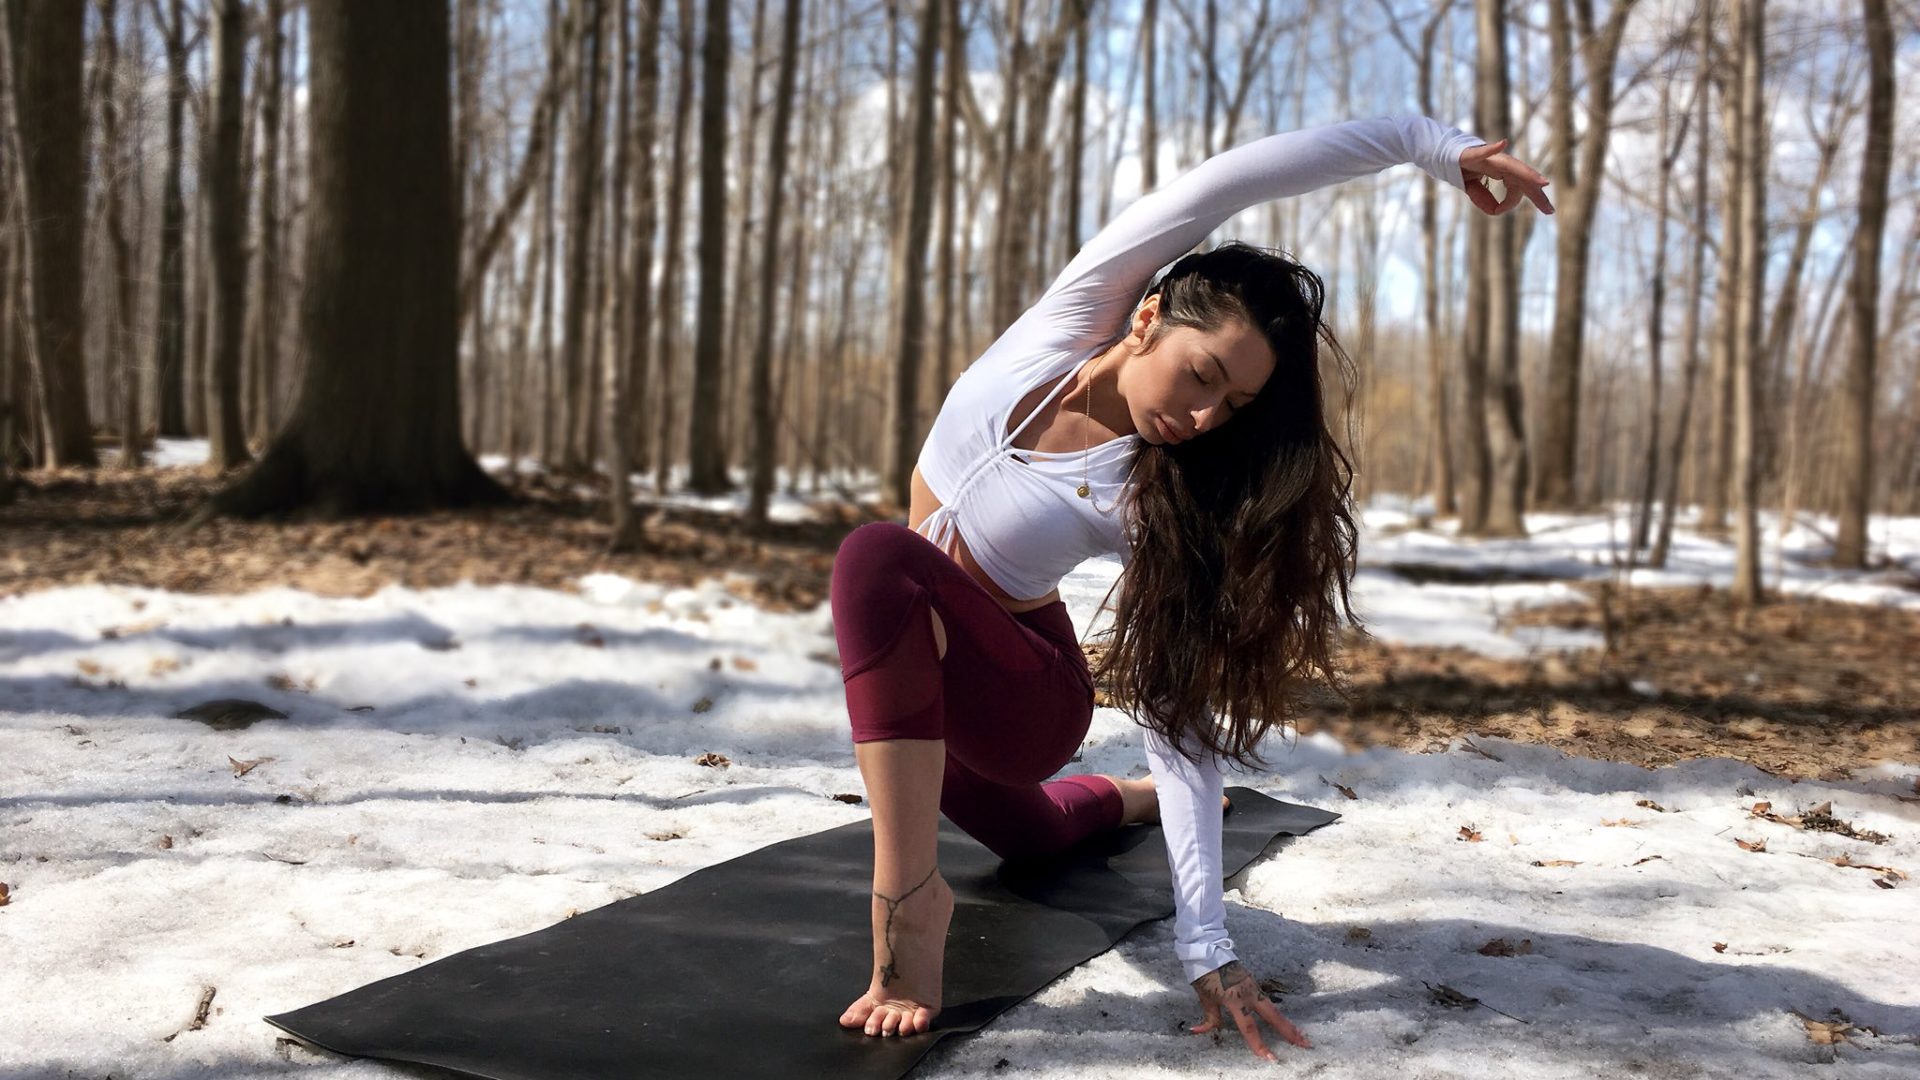 17 of the Most Impressive Yoga Poses on Instagram | SELF